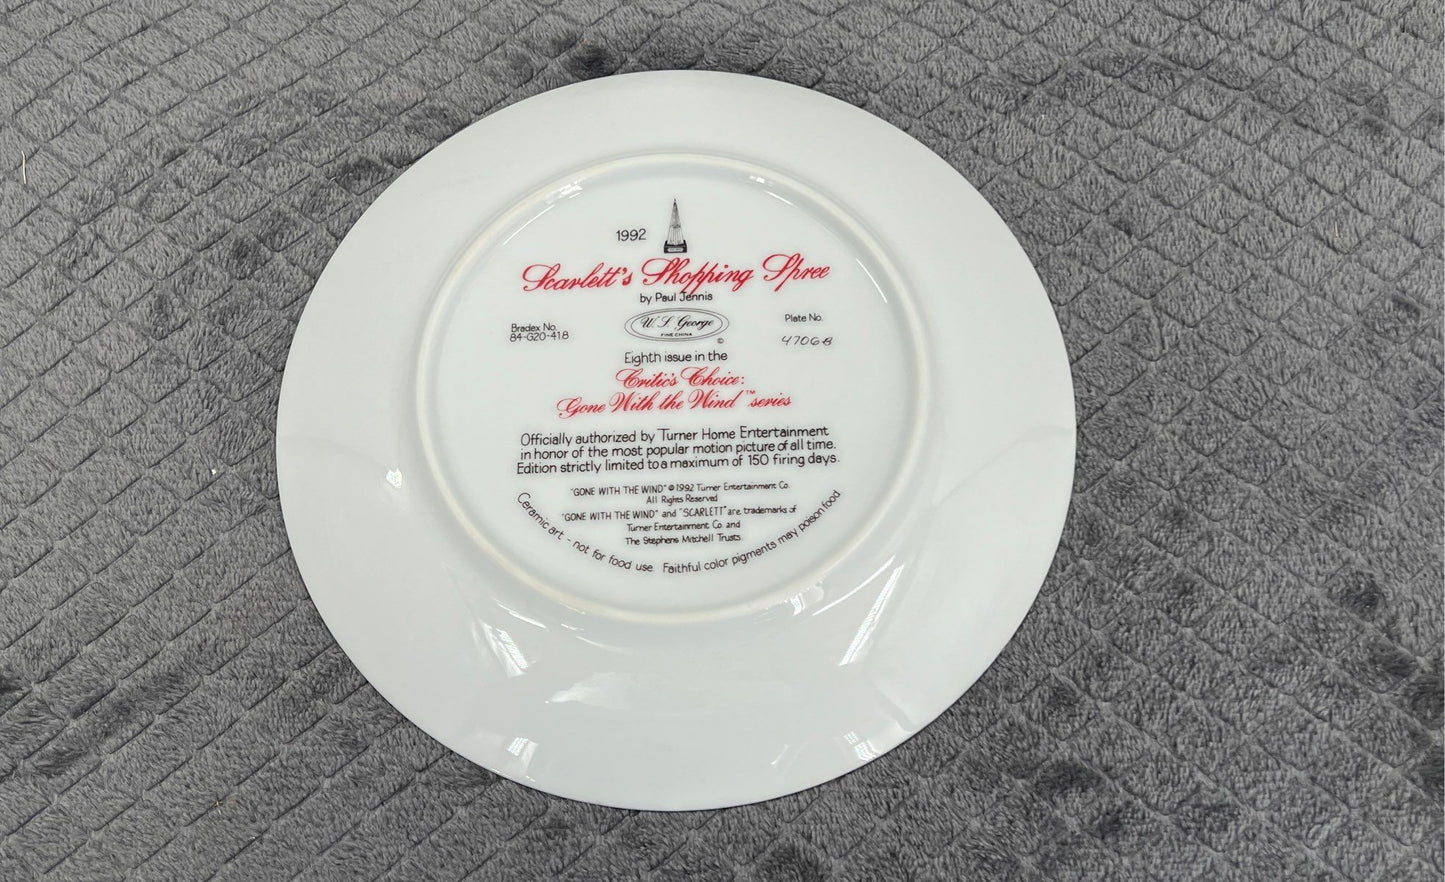 Gone With The Wind Collectors Plates Lot Of 2 W.S. George-By Paul Jennis-1992